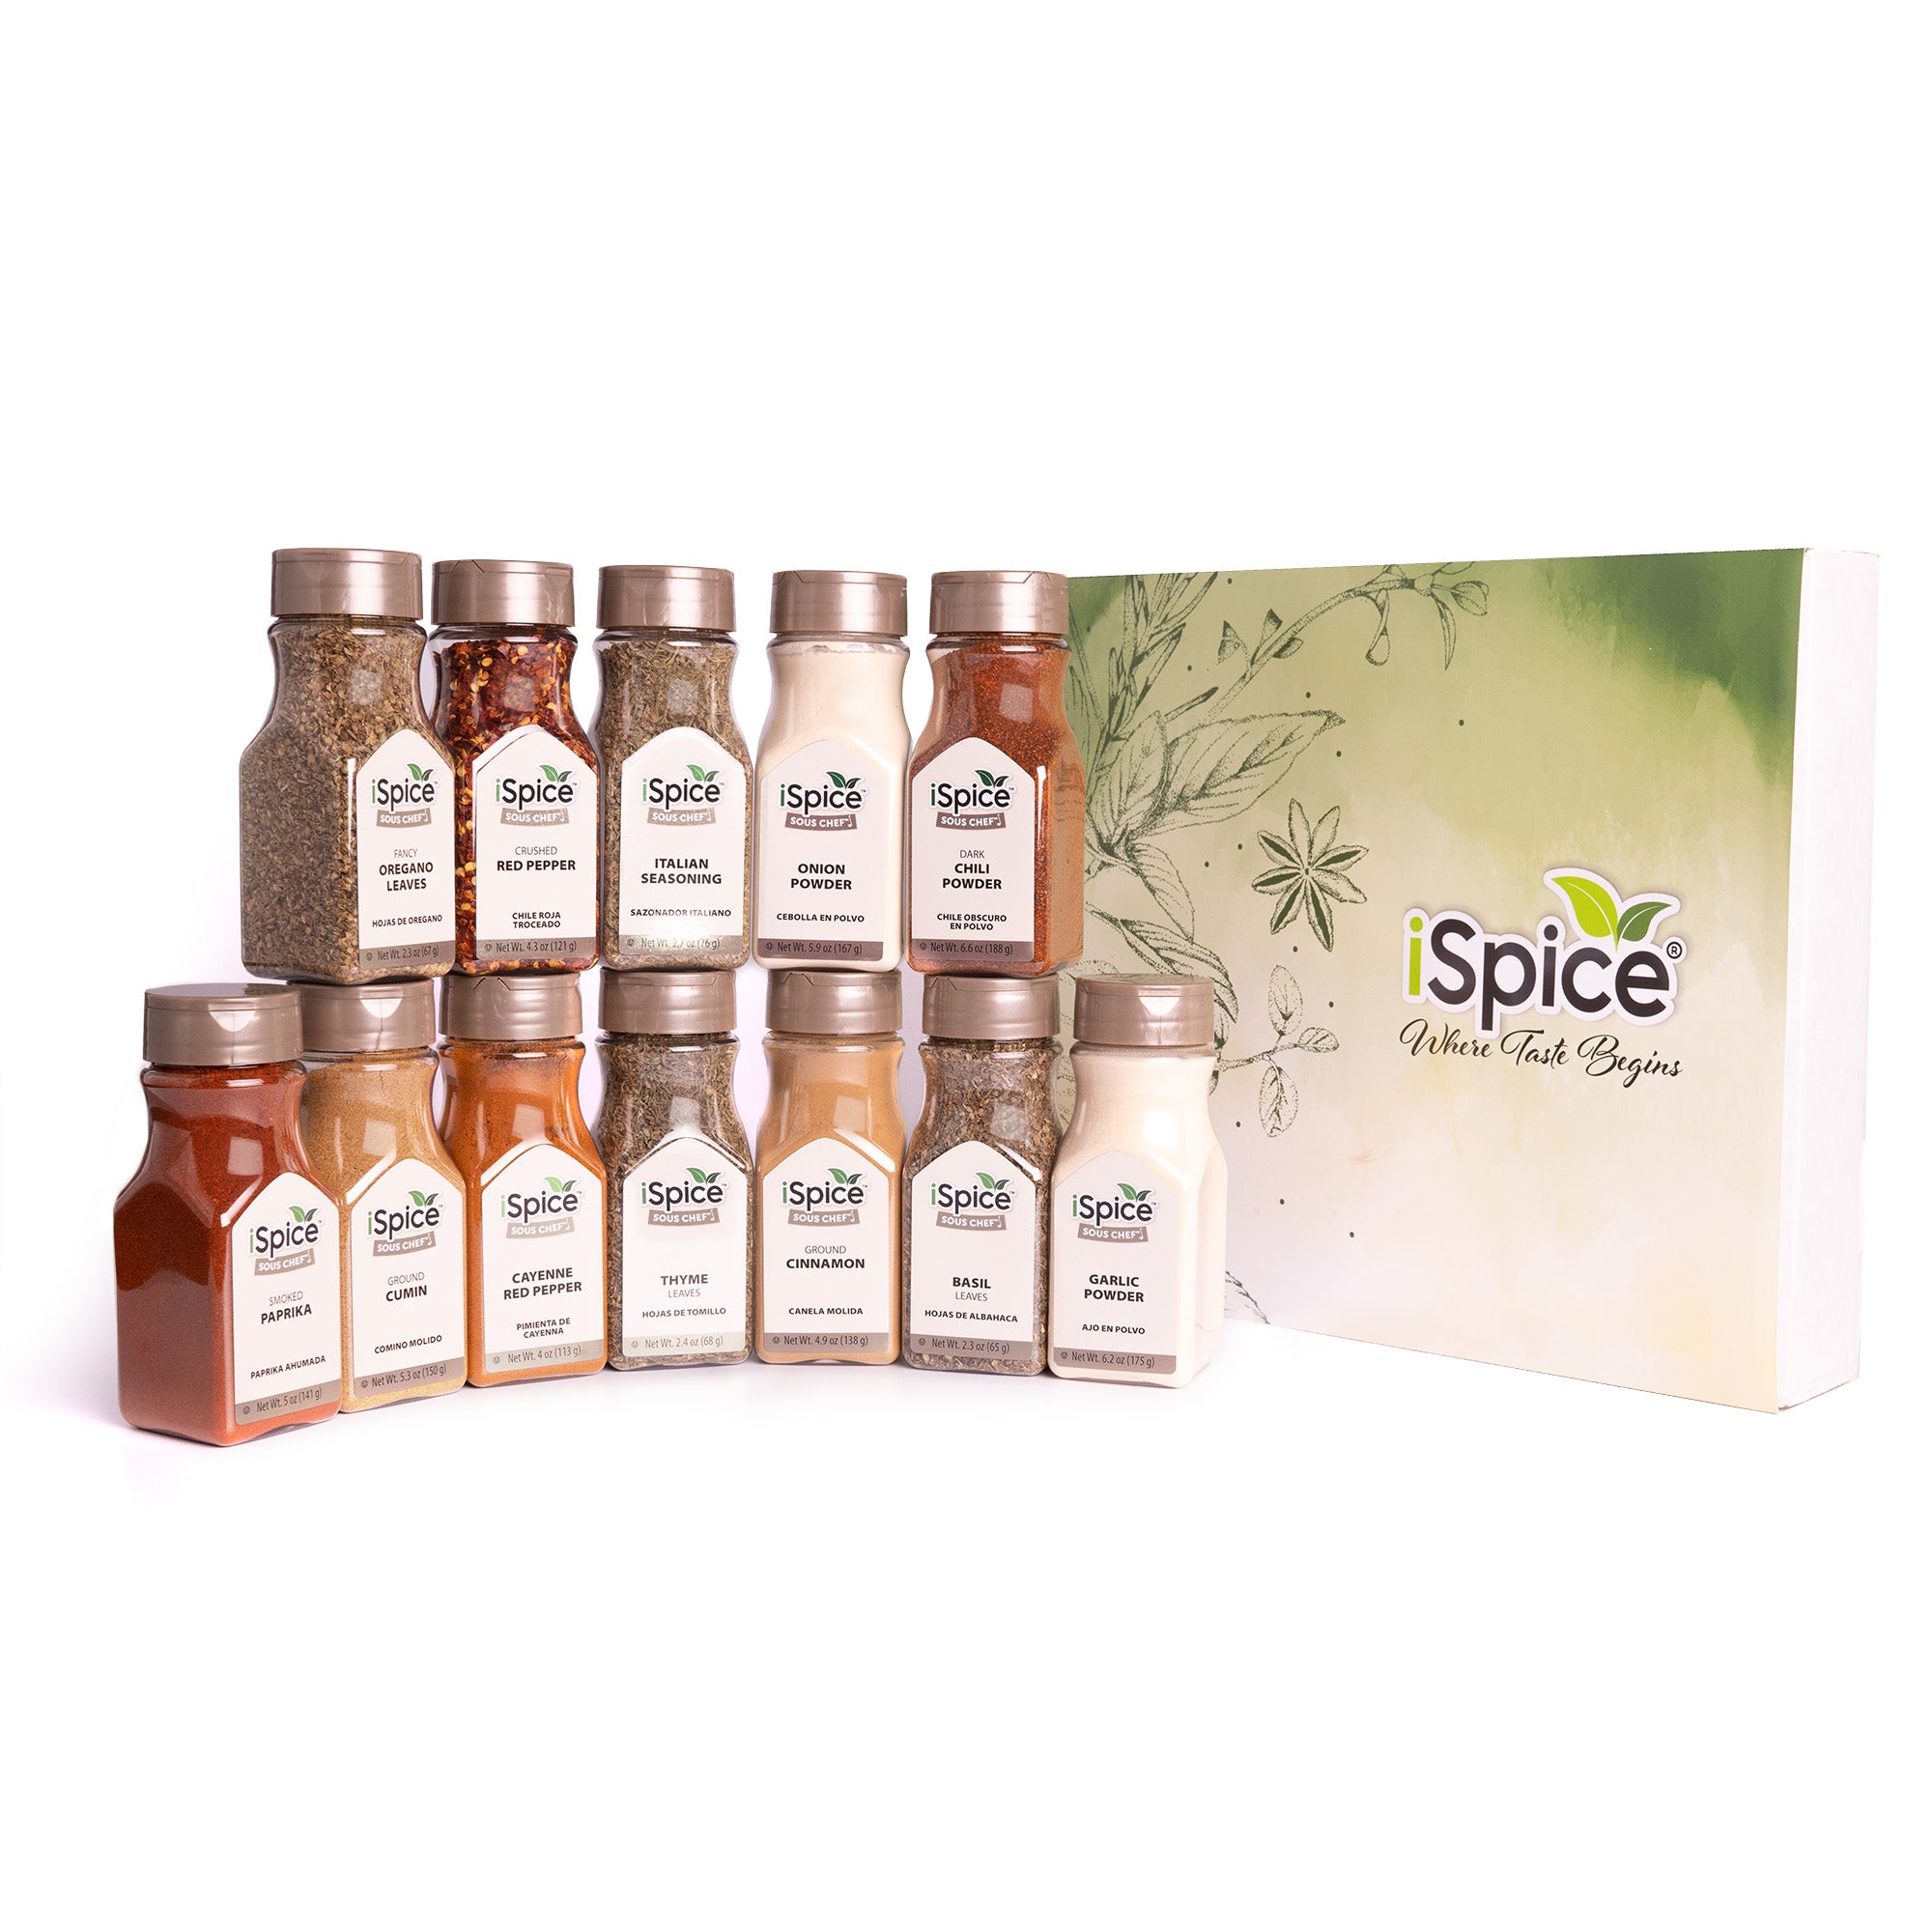 NS Supreme Spice Starter Set #1 with 6 Essential Spices for Cooking Basics ? 6 Piece Spice Gift Set Includes Chili Powder, Onion Powder, Garlic Powder